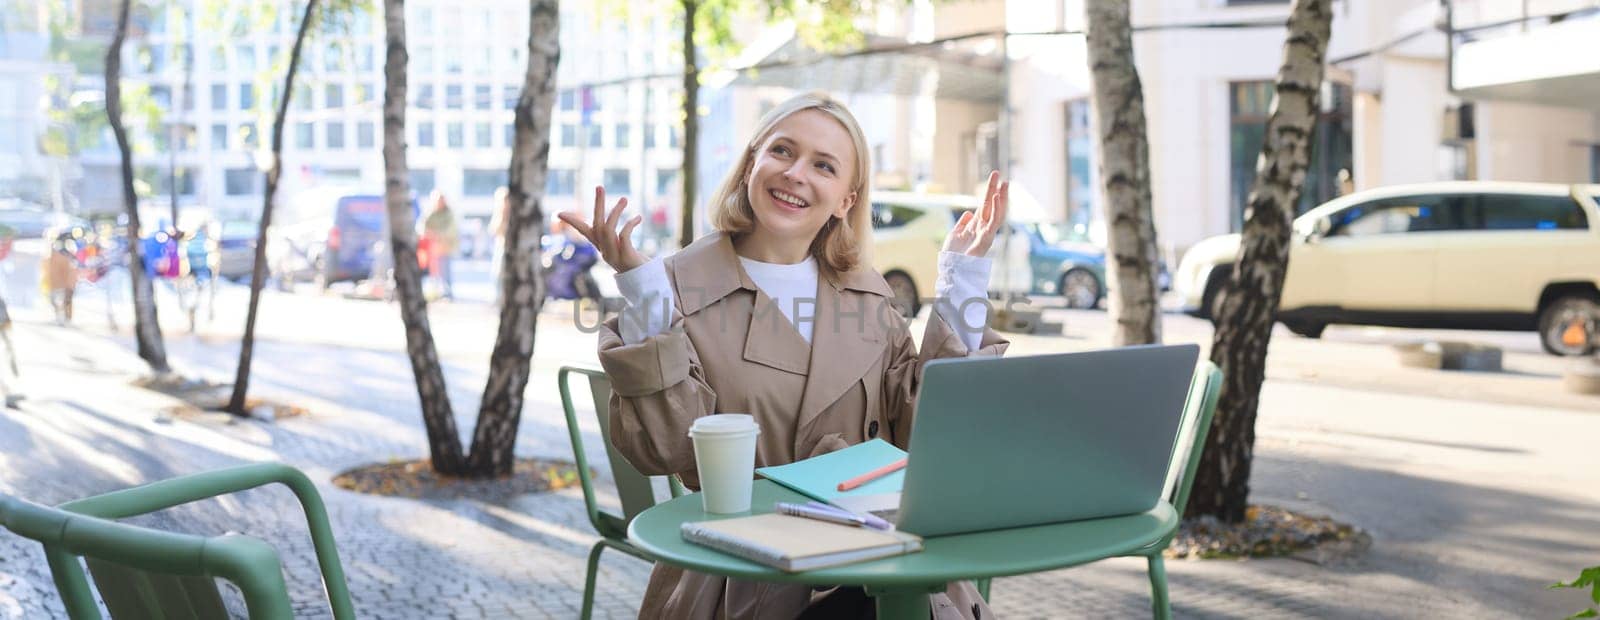 Image of young modern woman, chatting with someone online, having video call via laptop, sitting in outdoor cafe, drinking coffee, gesturing and smiling.